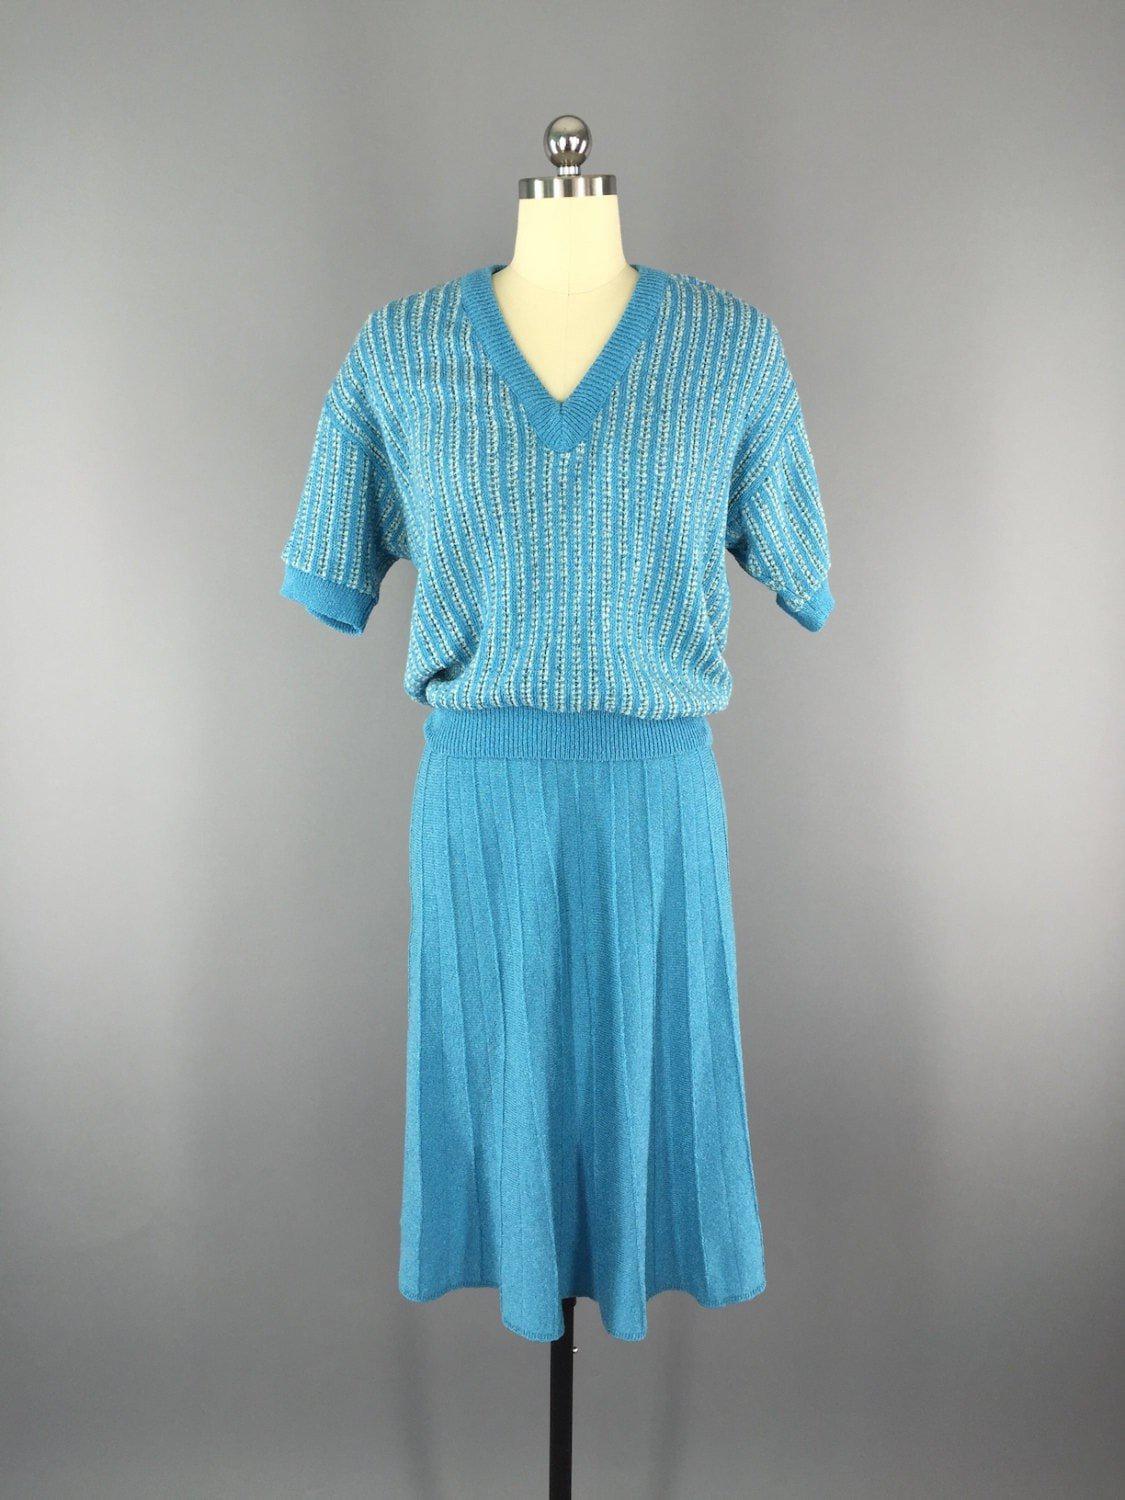 Vintage Skirt and Sweater Set / 1980s Blue Knit - ThisBlueBird